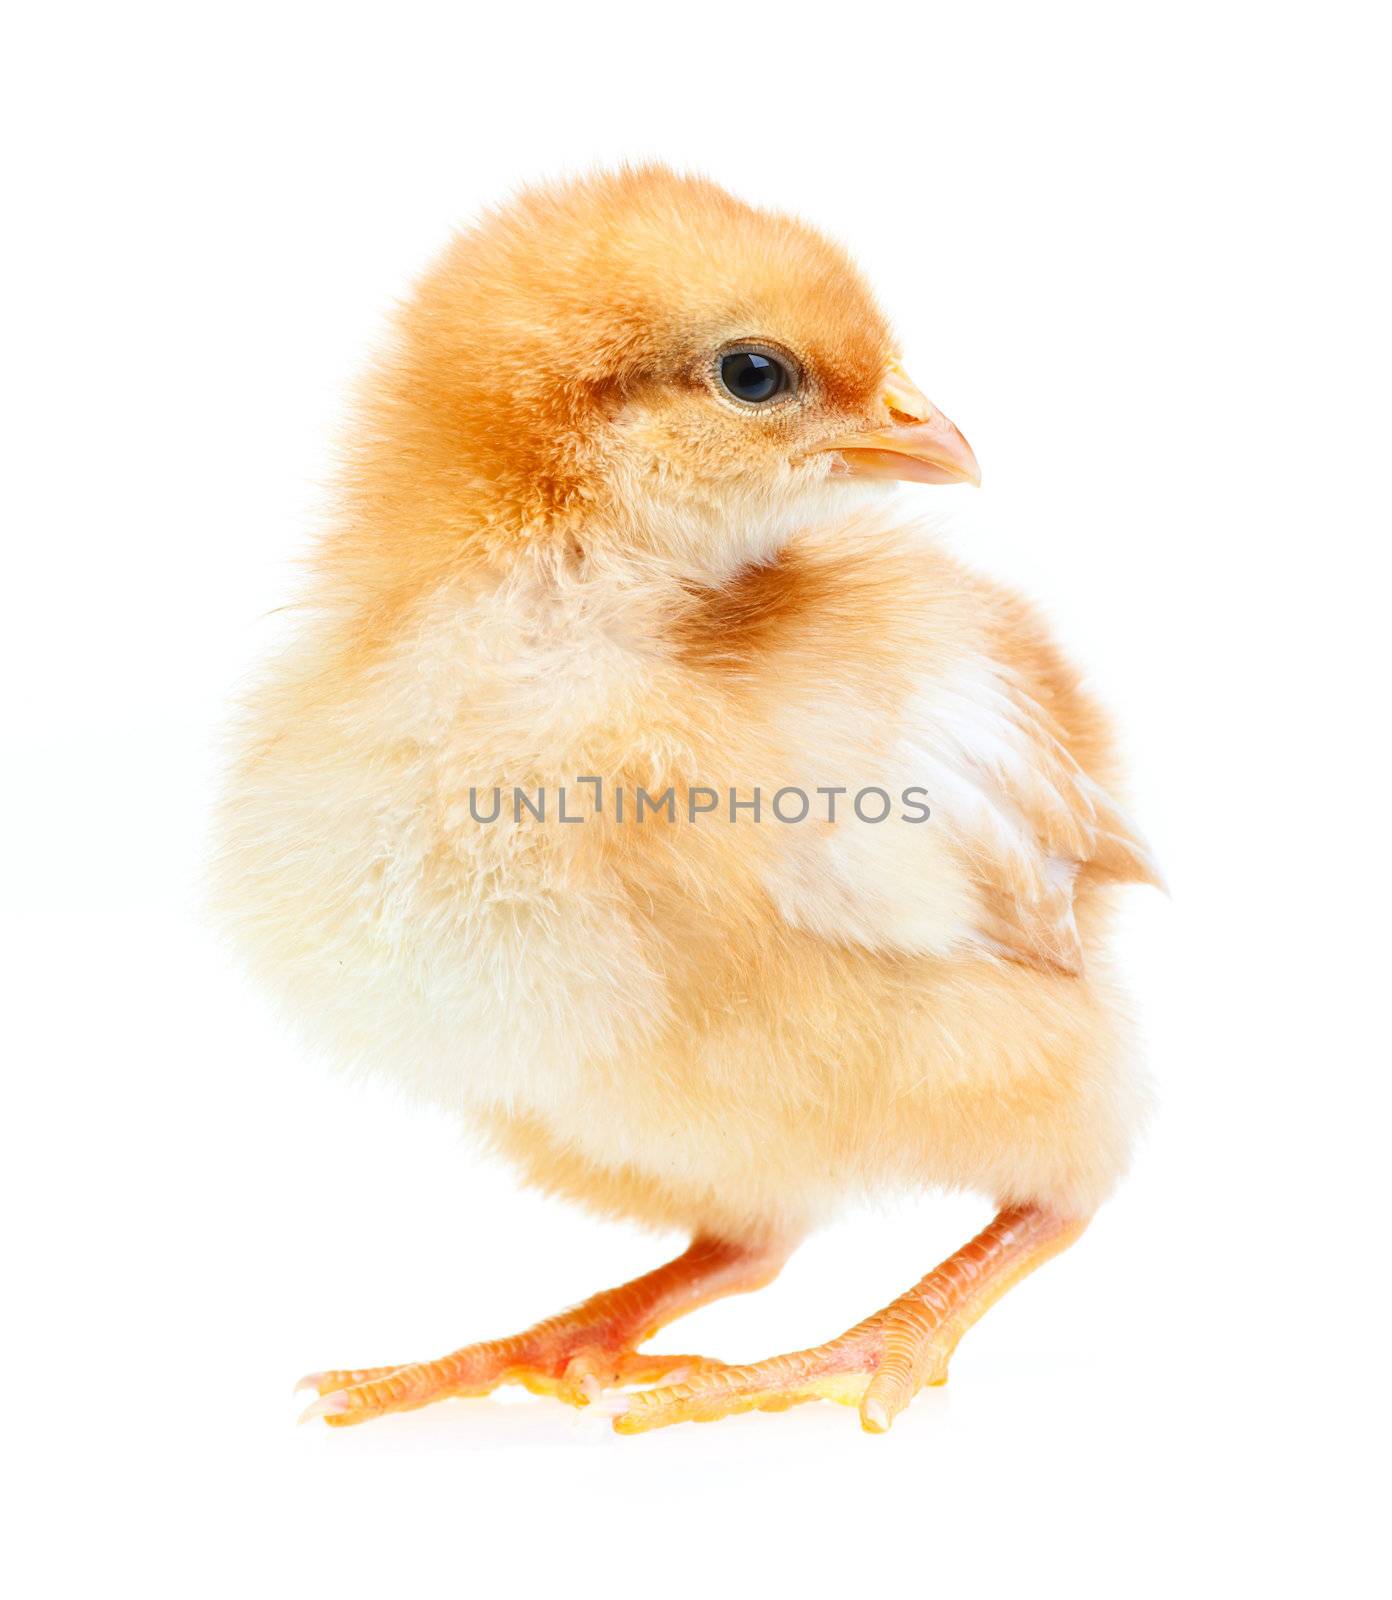 Baby chicken isolated on white background